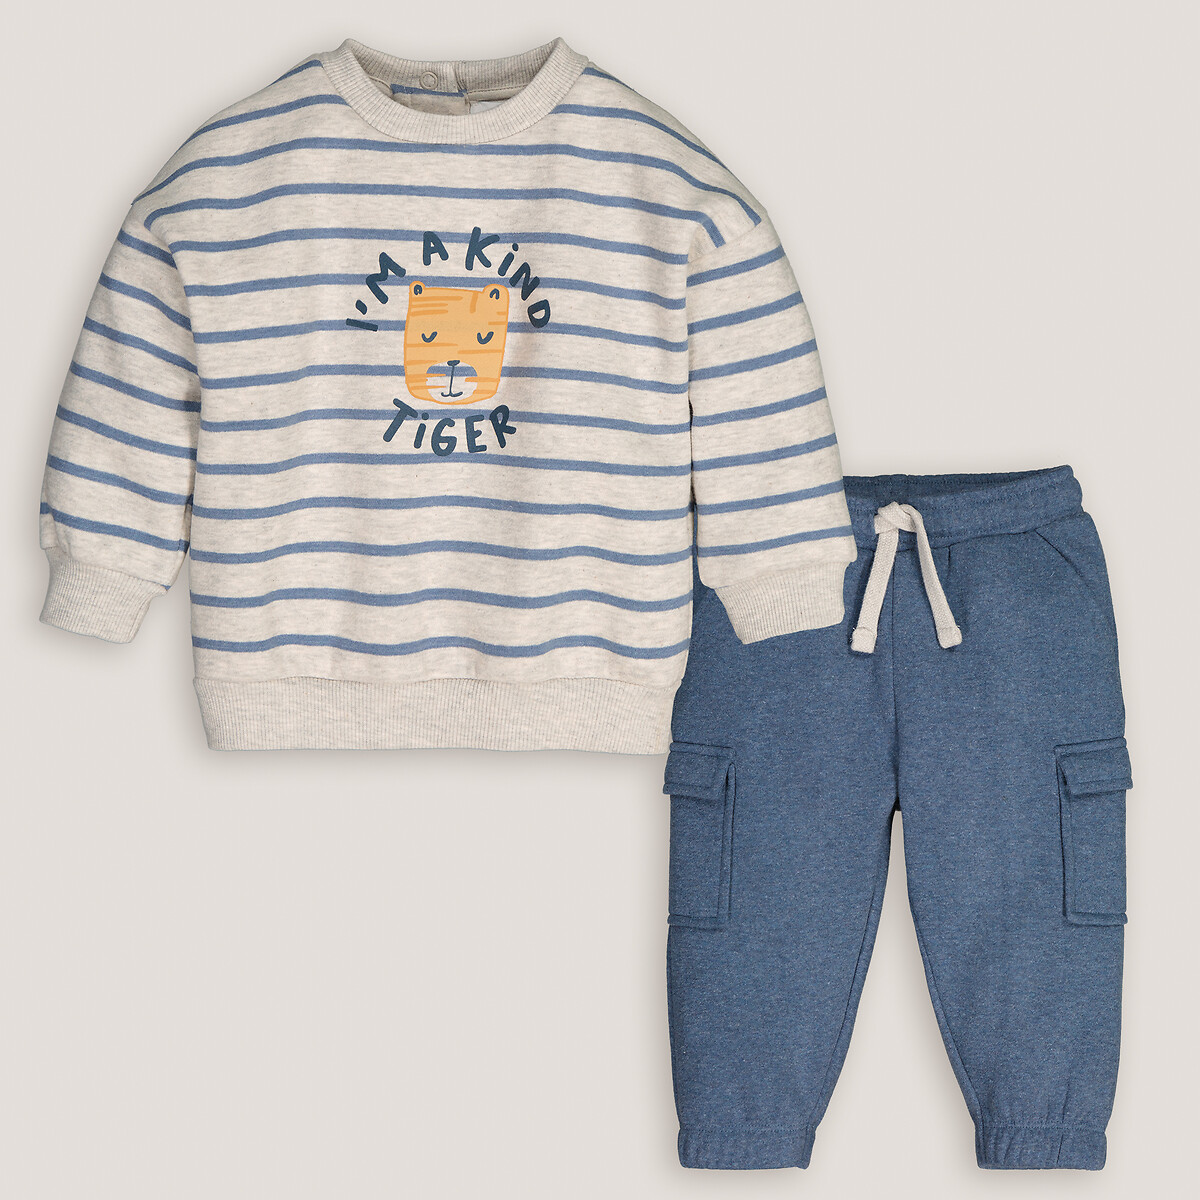 Sweatshirt/Joggers Outfit in Cotton Mix